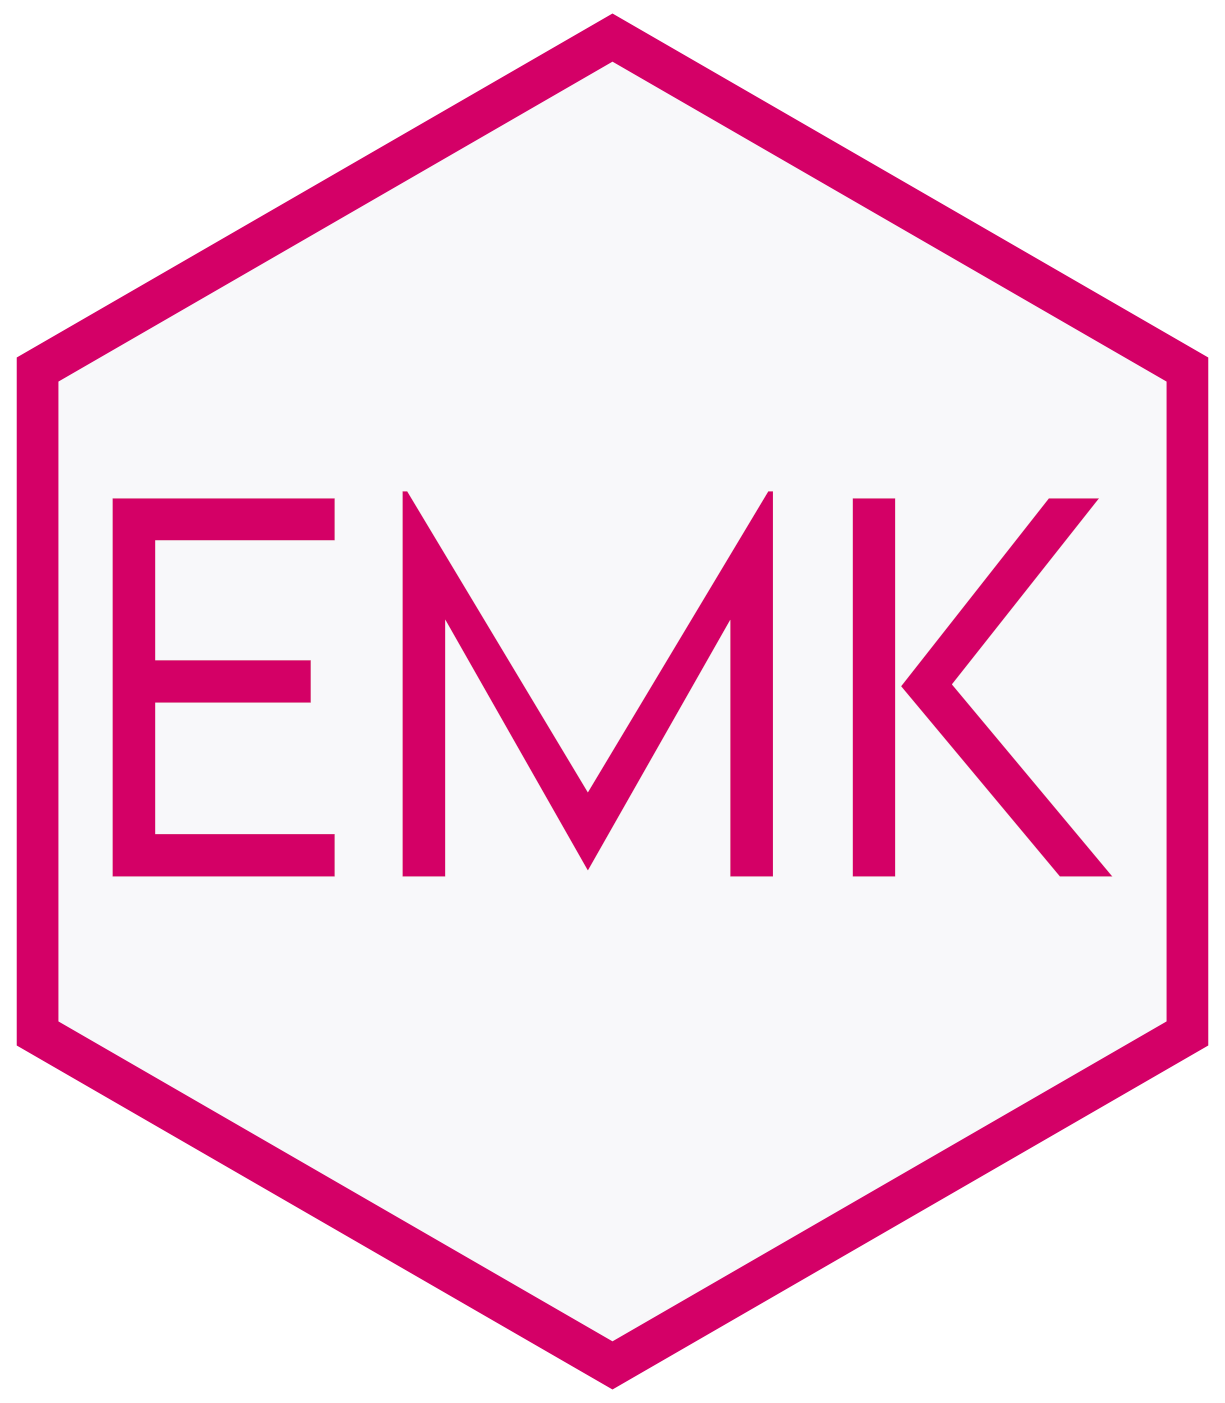 A hexagon with a bright pink outline and white background with the initials E M K also in bright pink
